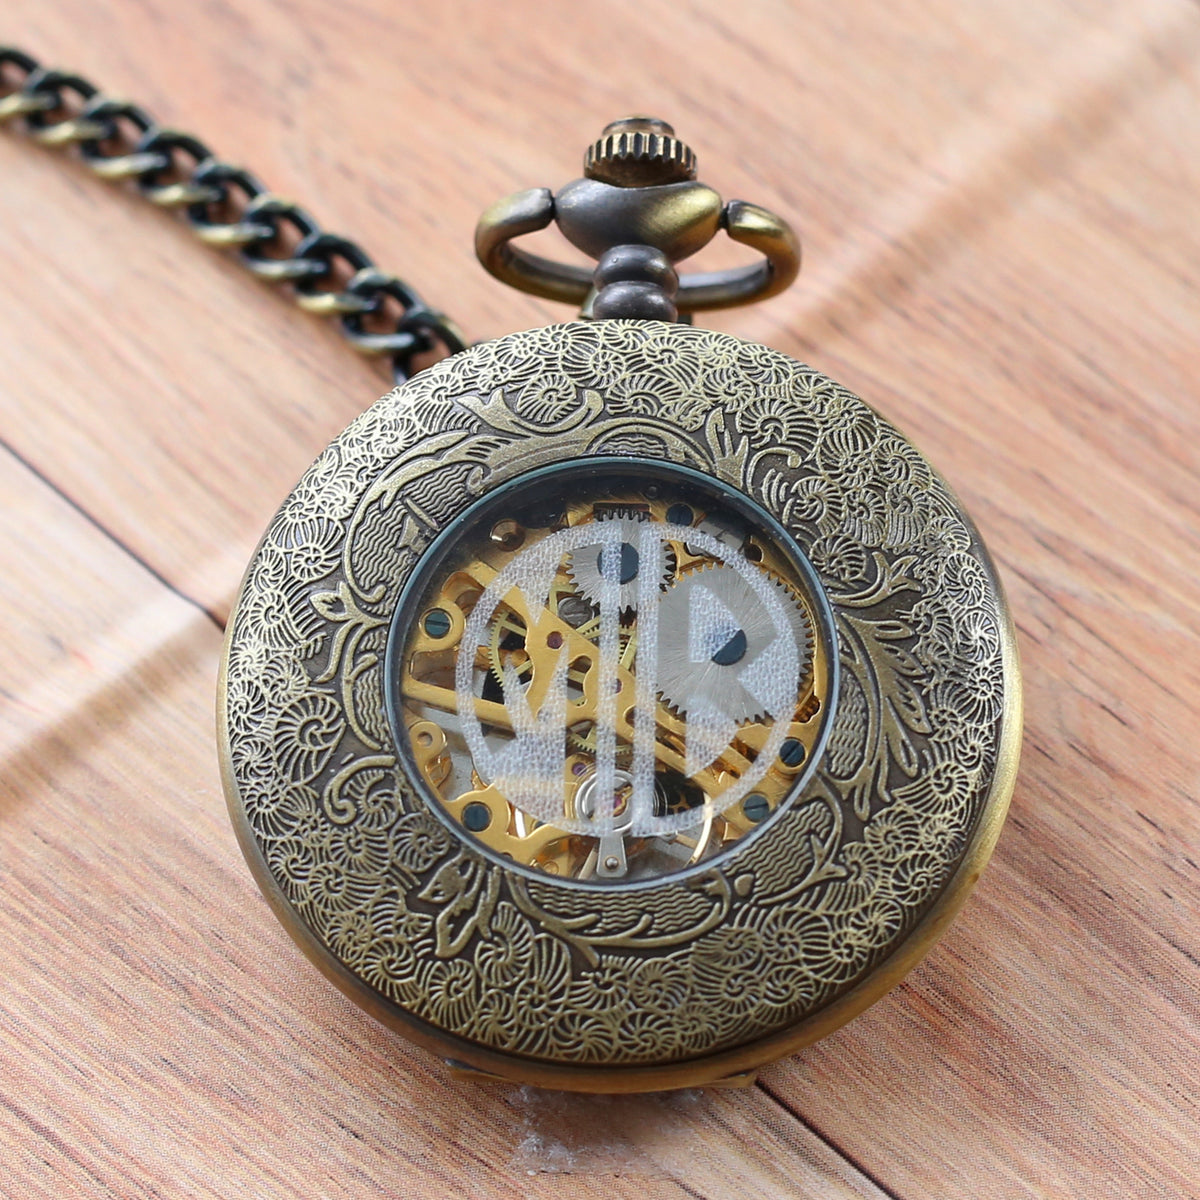 Mens Personalized Pocket Watch with chain - Antique bronze - Steampunk - Mechanical watch WEDDING GIFT VM009